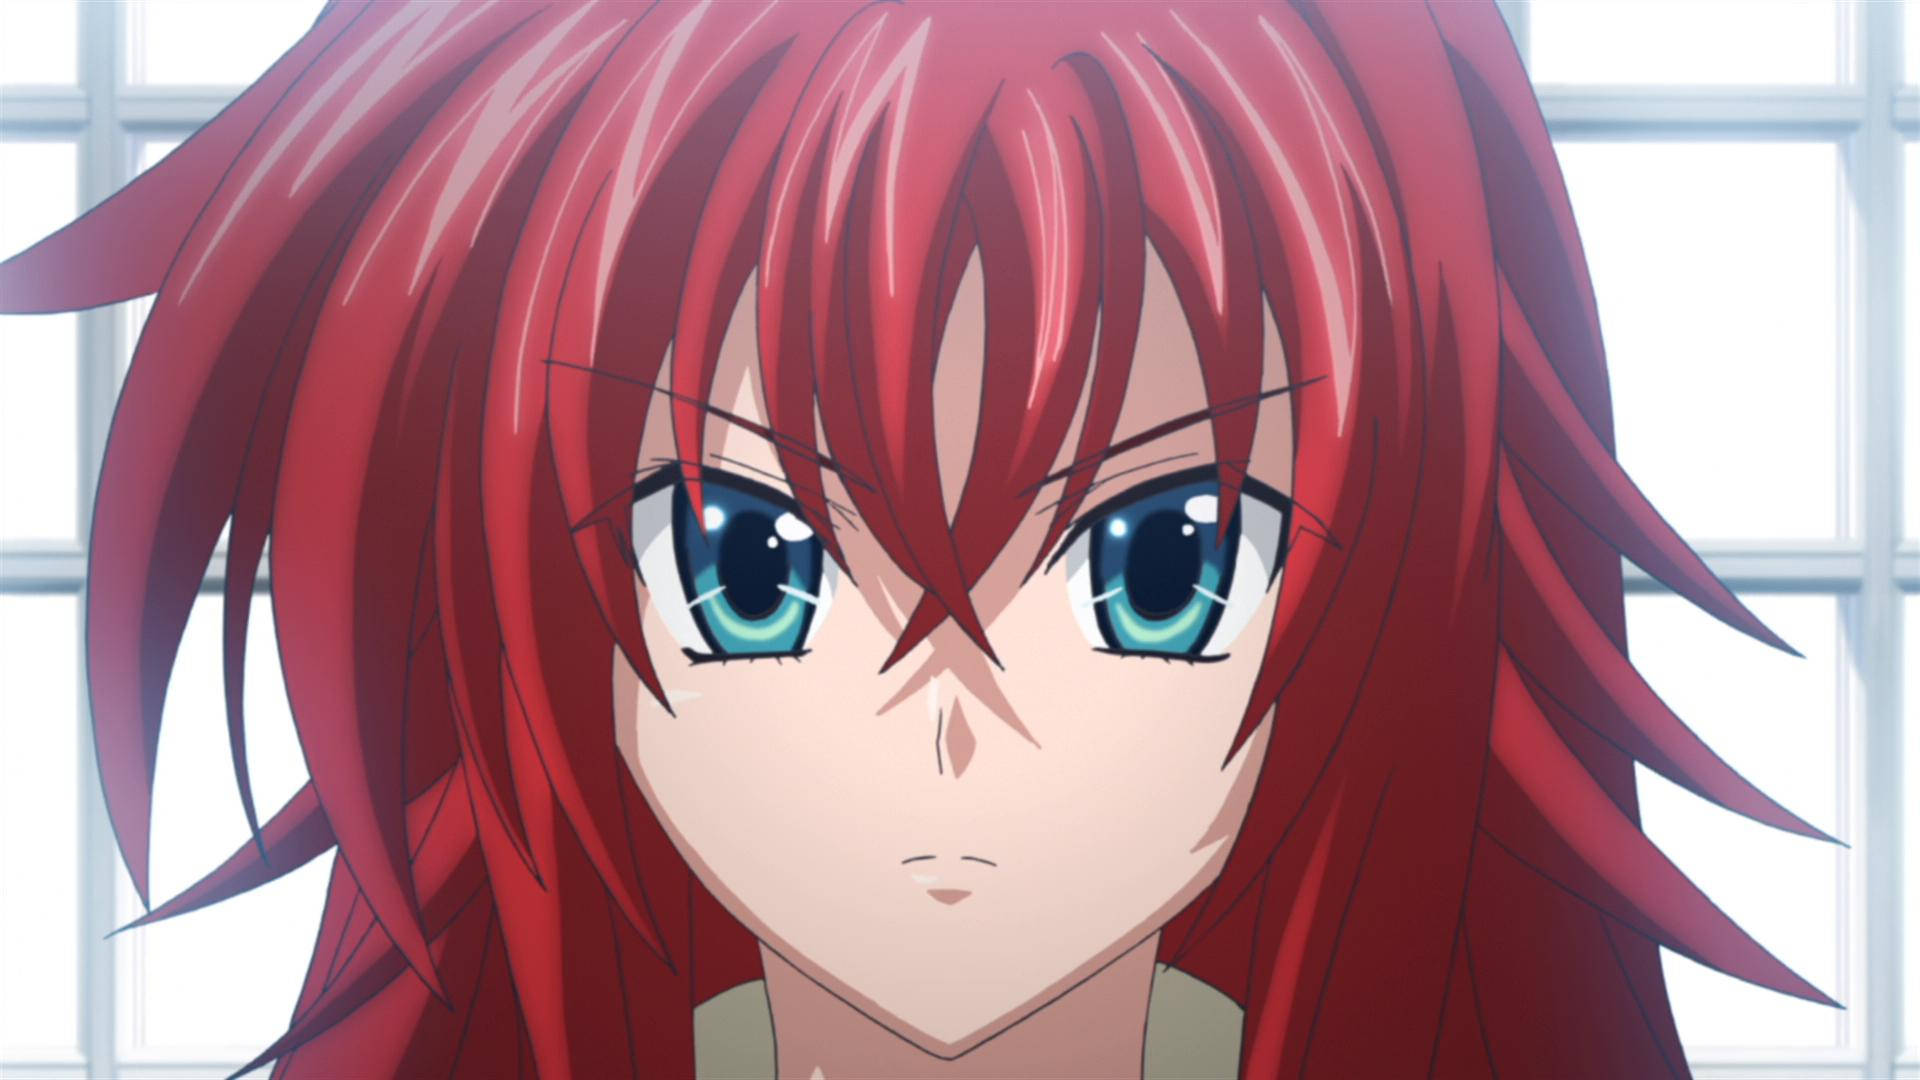 Rias Gremory - The Star Of Highschool Dxd Background